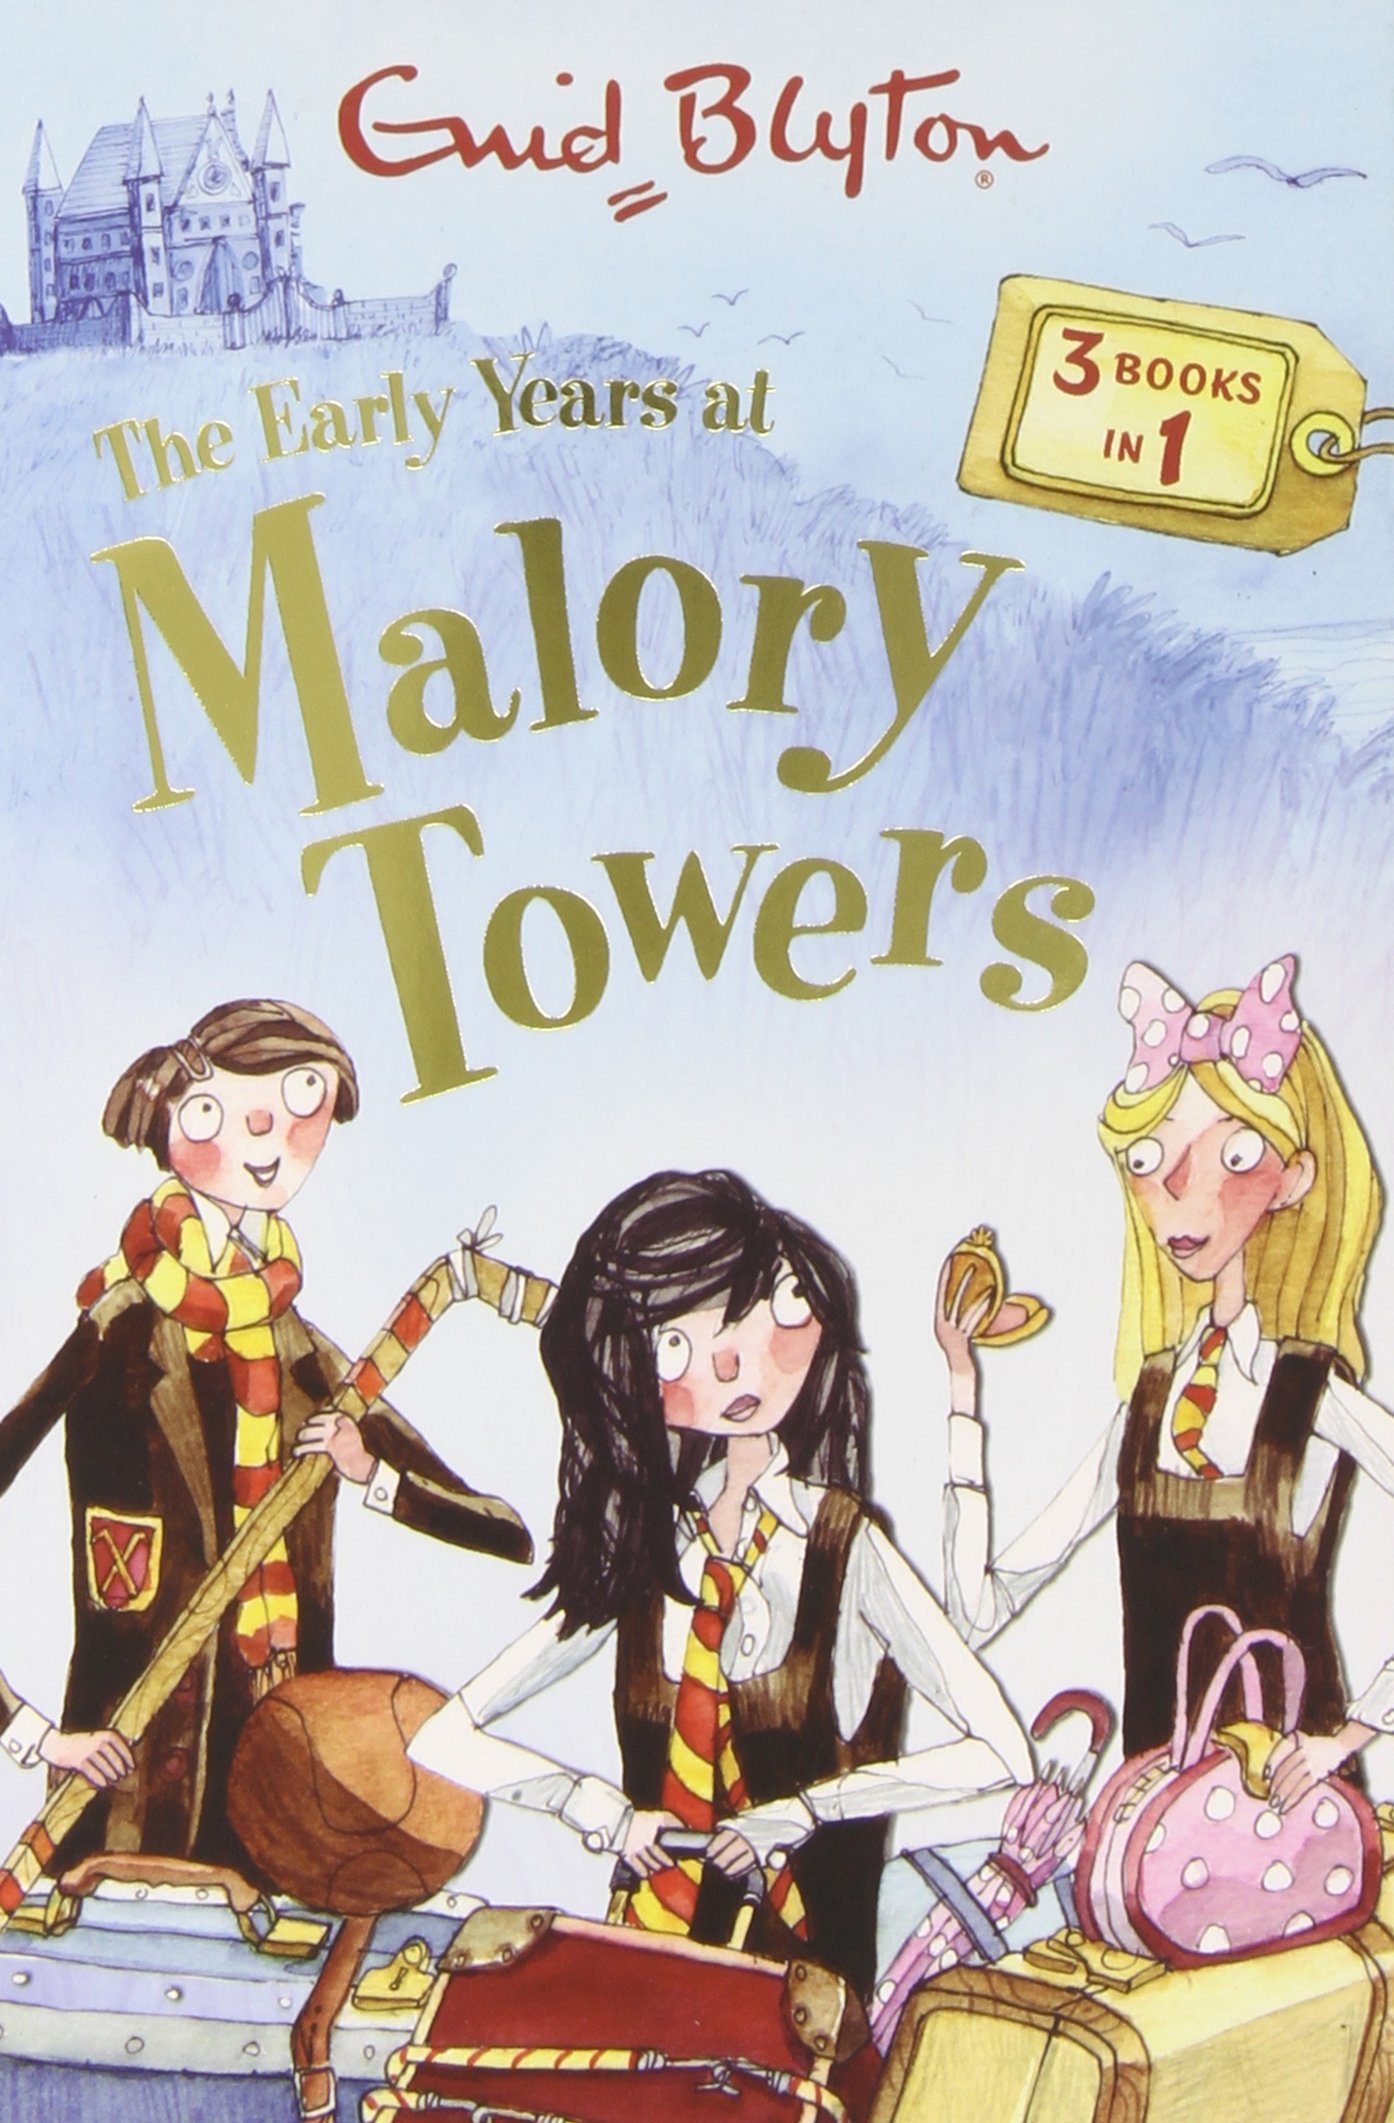 8 Reasons Why Your Kids Should Probably Stay Away from Enid Blyton’s Books